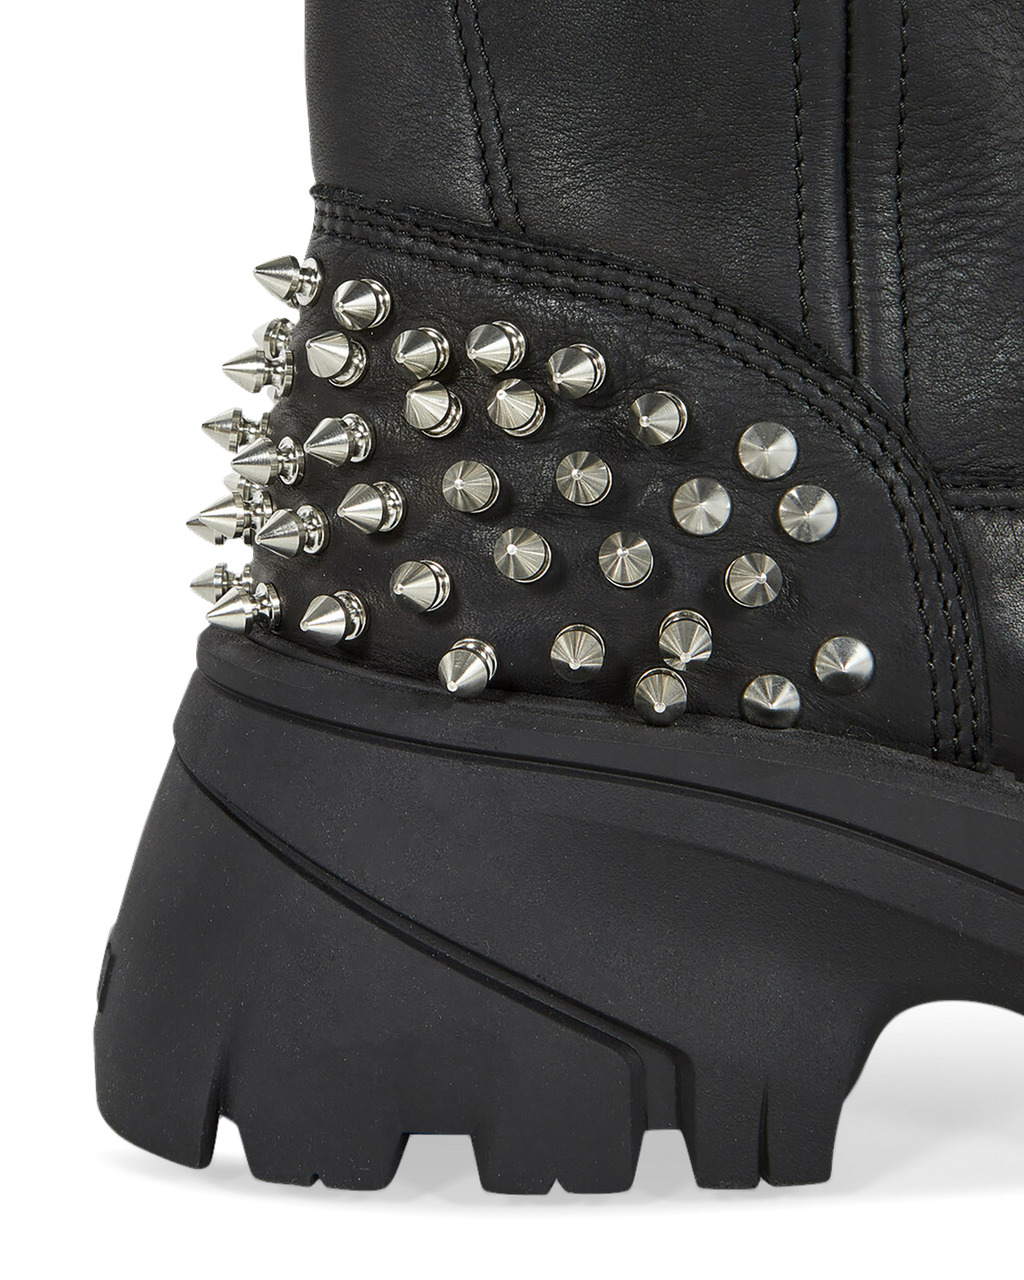 WORK BOOT WITH STUDS (C) - 6